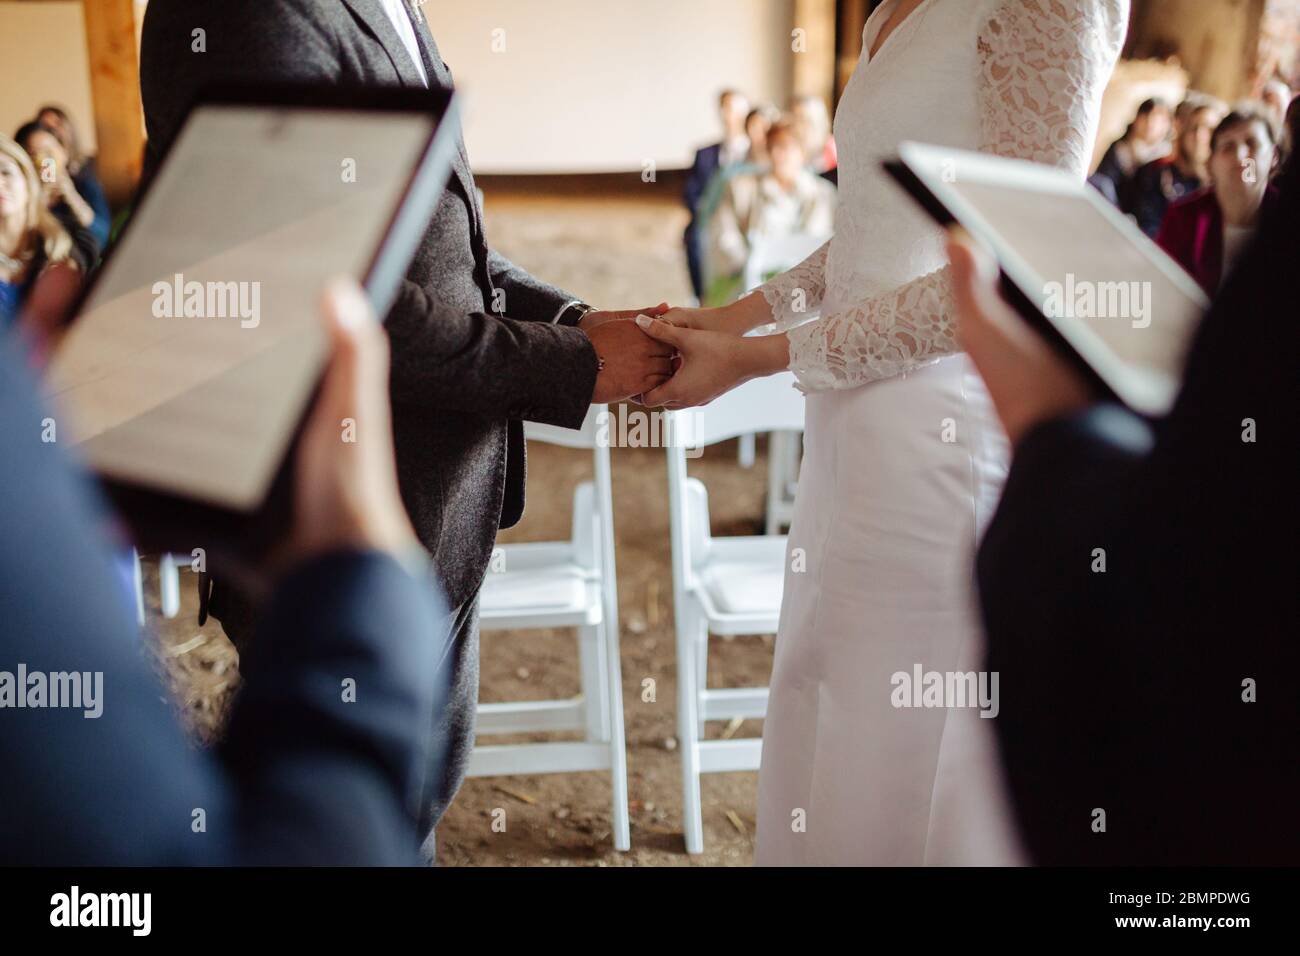 Bride and groom exchanging rings at their wedding Stock Photo